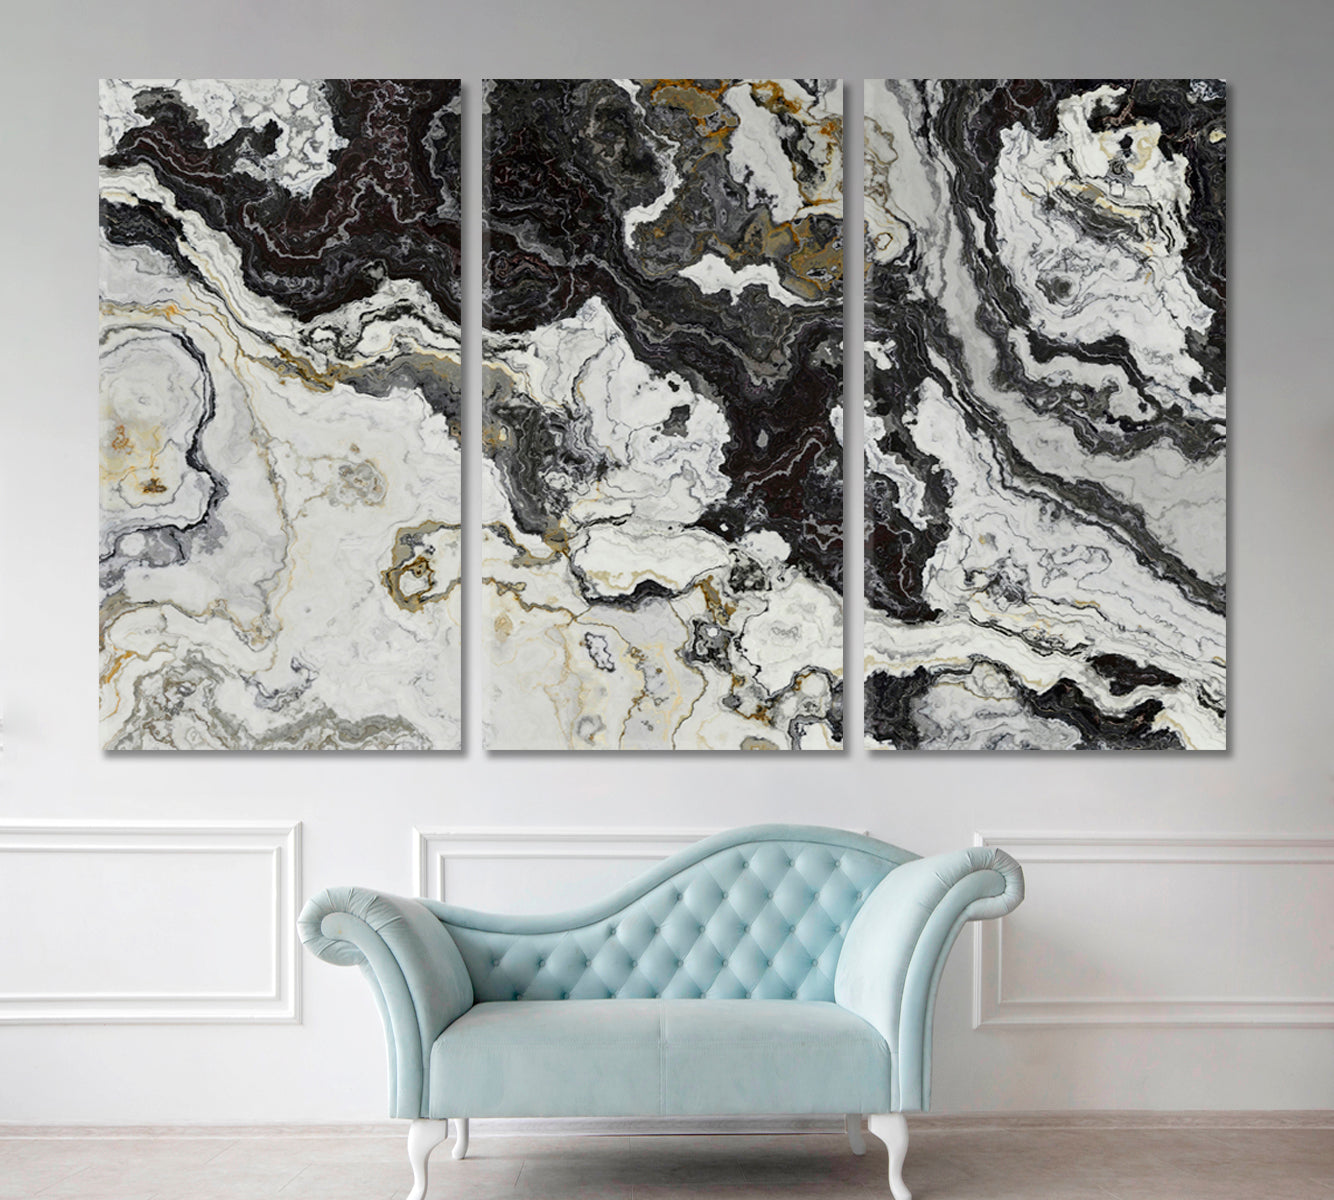 Black White Marble Pattern Curly Grey Veins Abstract Marble Oriental Art Print Canvas Artesty 3 panels 36" x 24" 